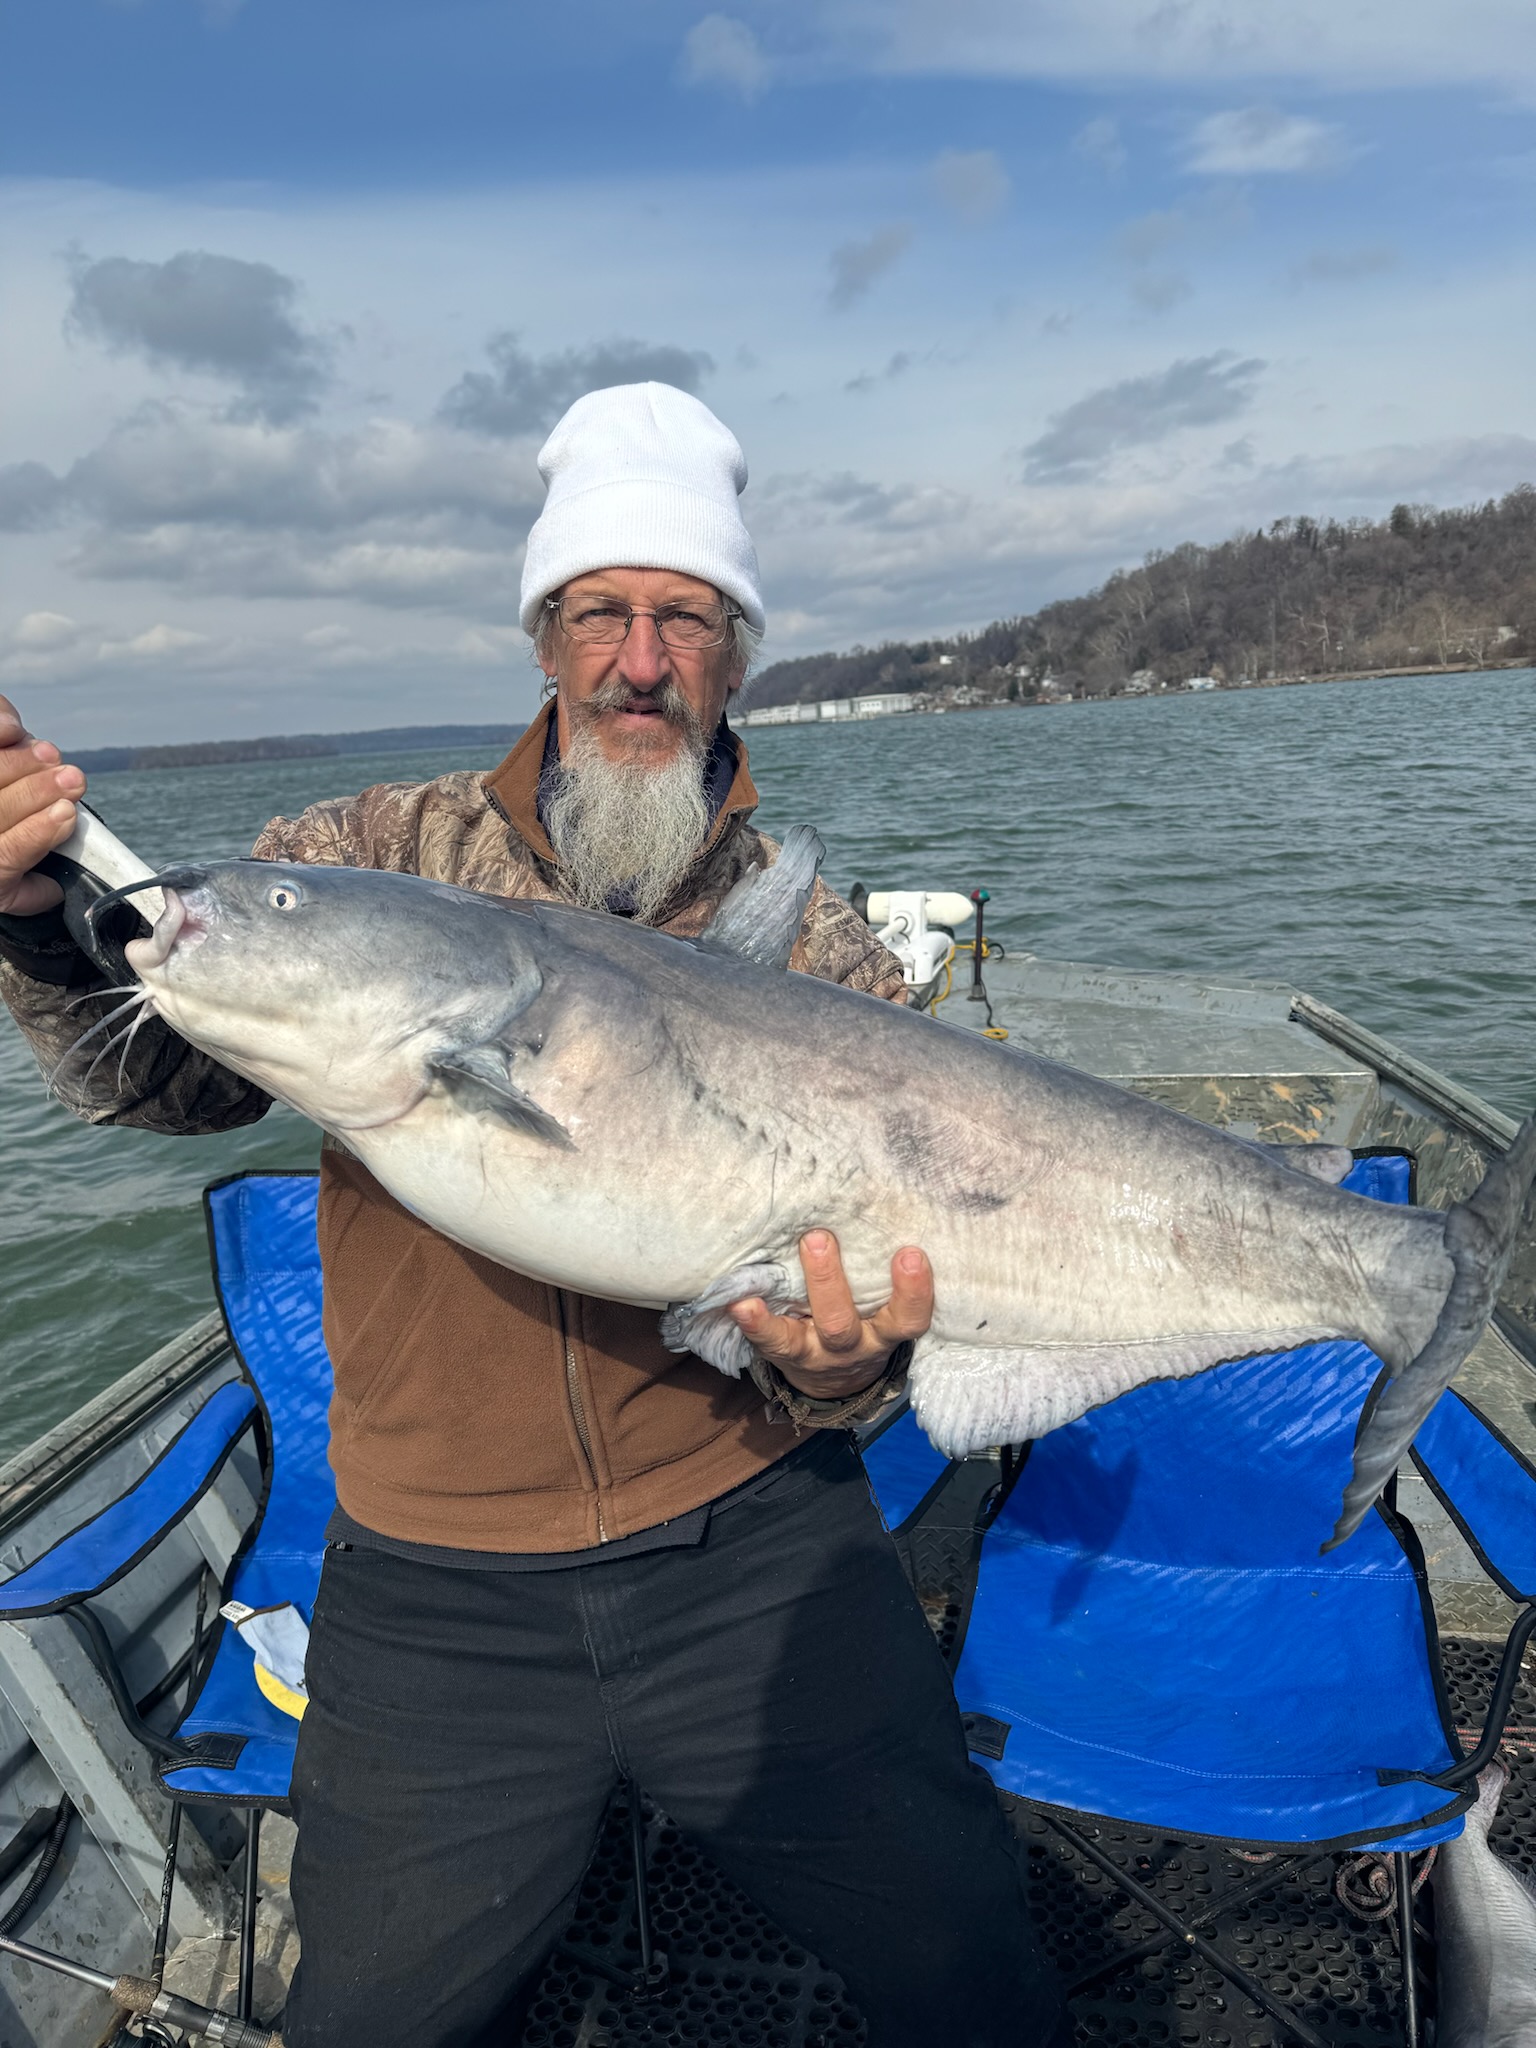 Blue Catfish Are Spreading Rapidly in Maryland Waters, As State Officials  and the Fishing Community Work To Contain the Invasive Species